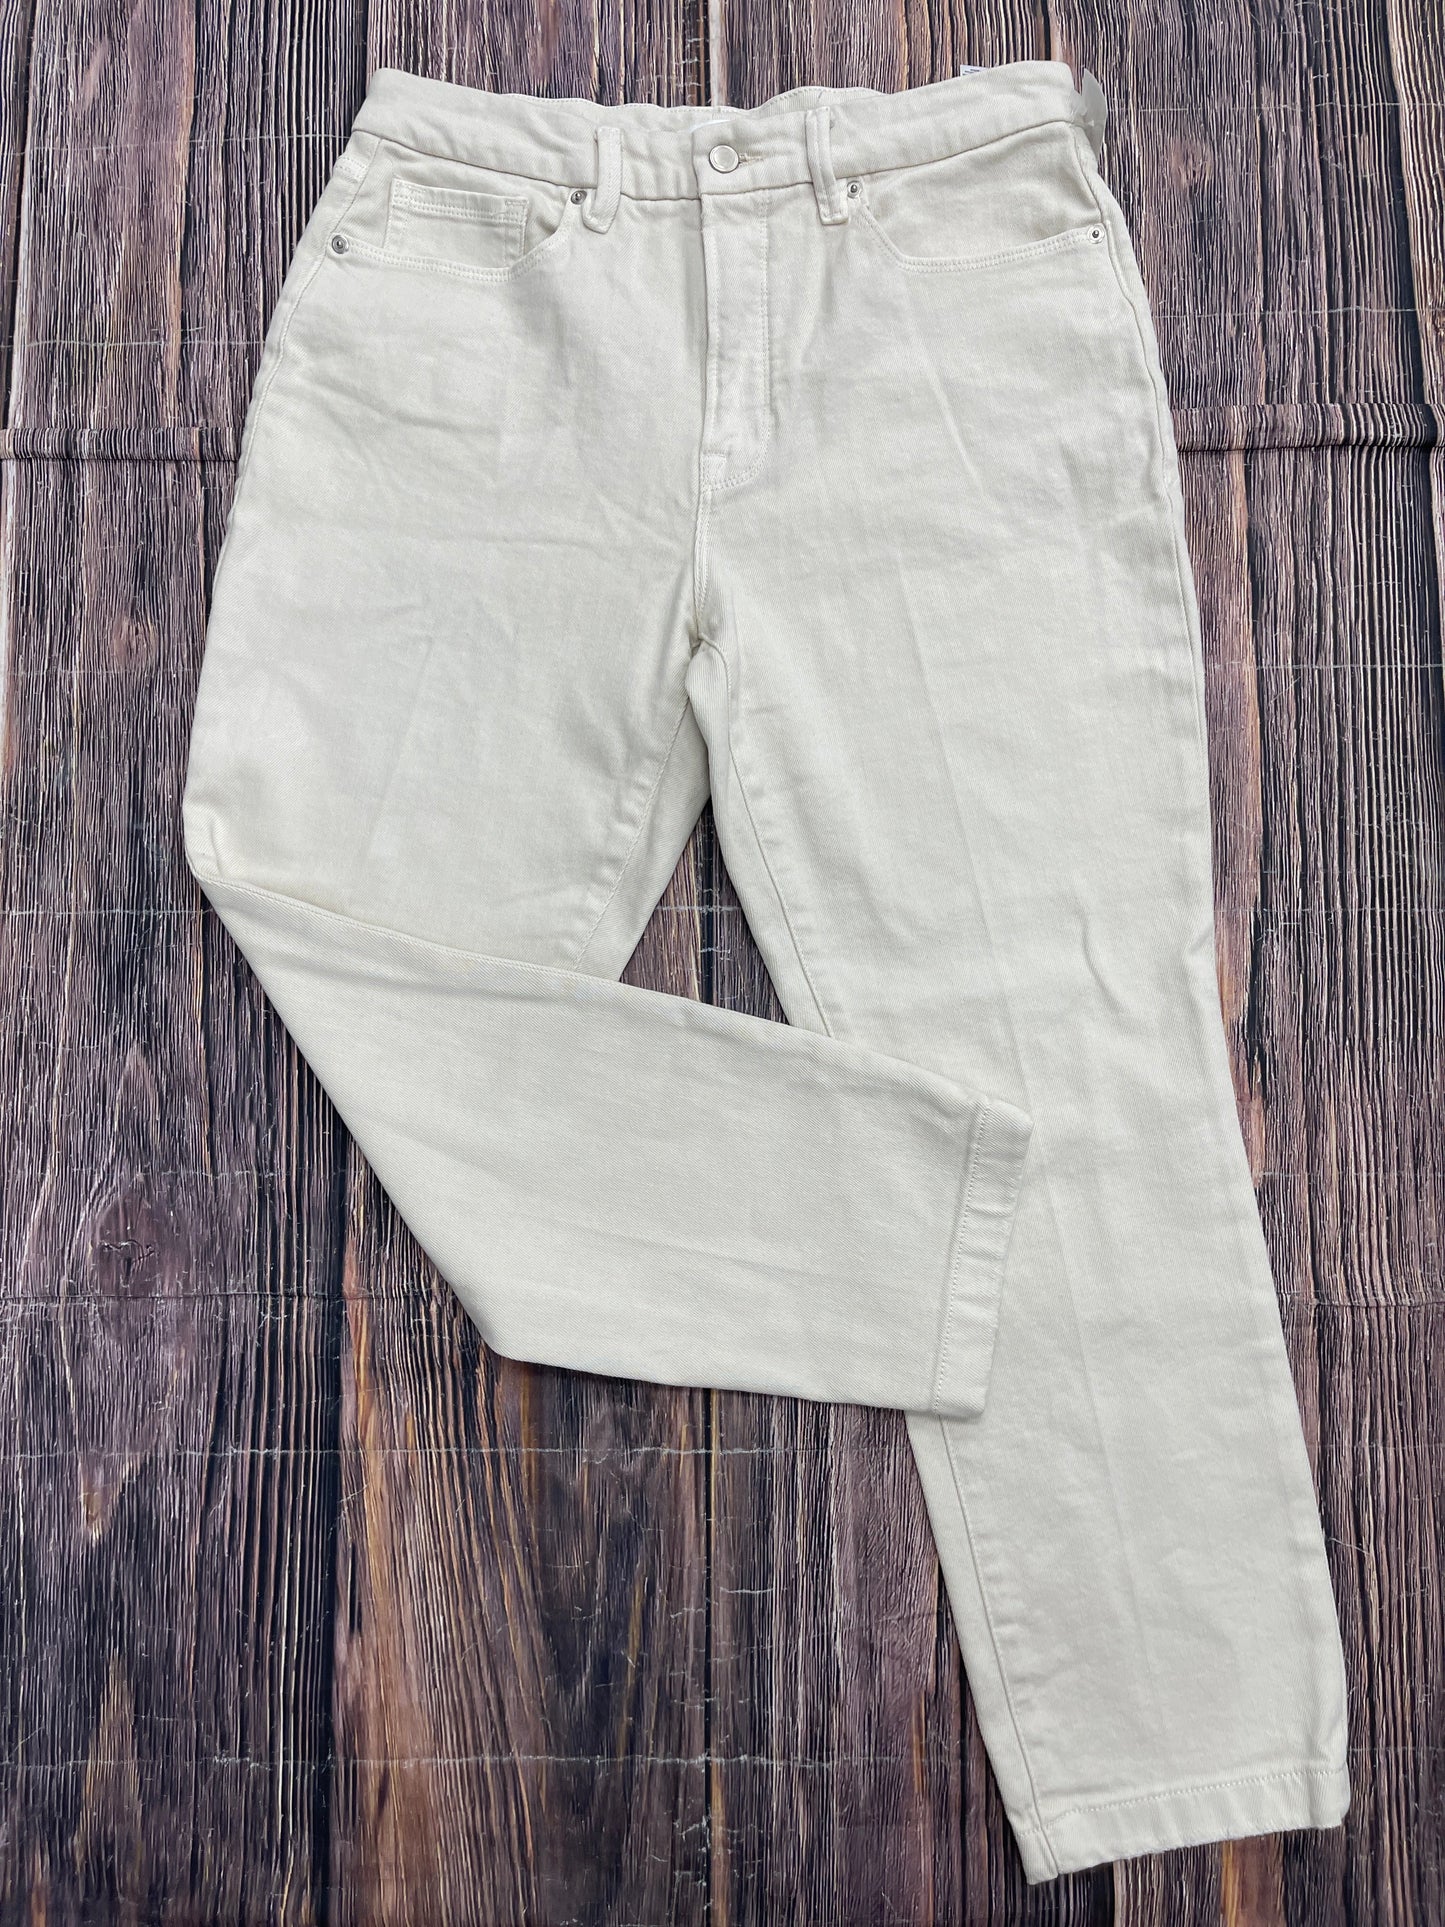 Pants Chinos & Khakis By Good American  Size: 14